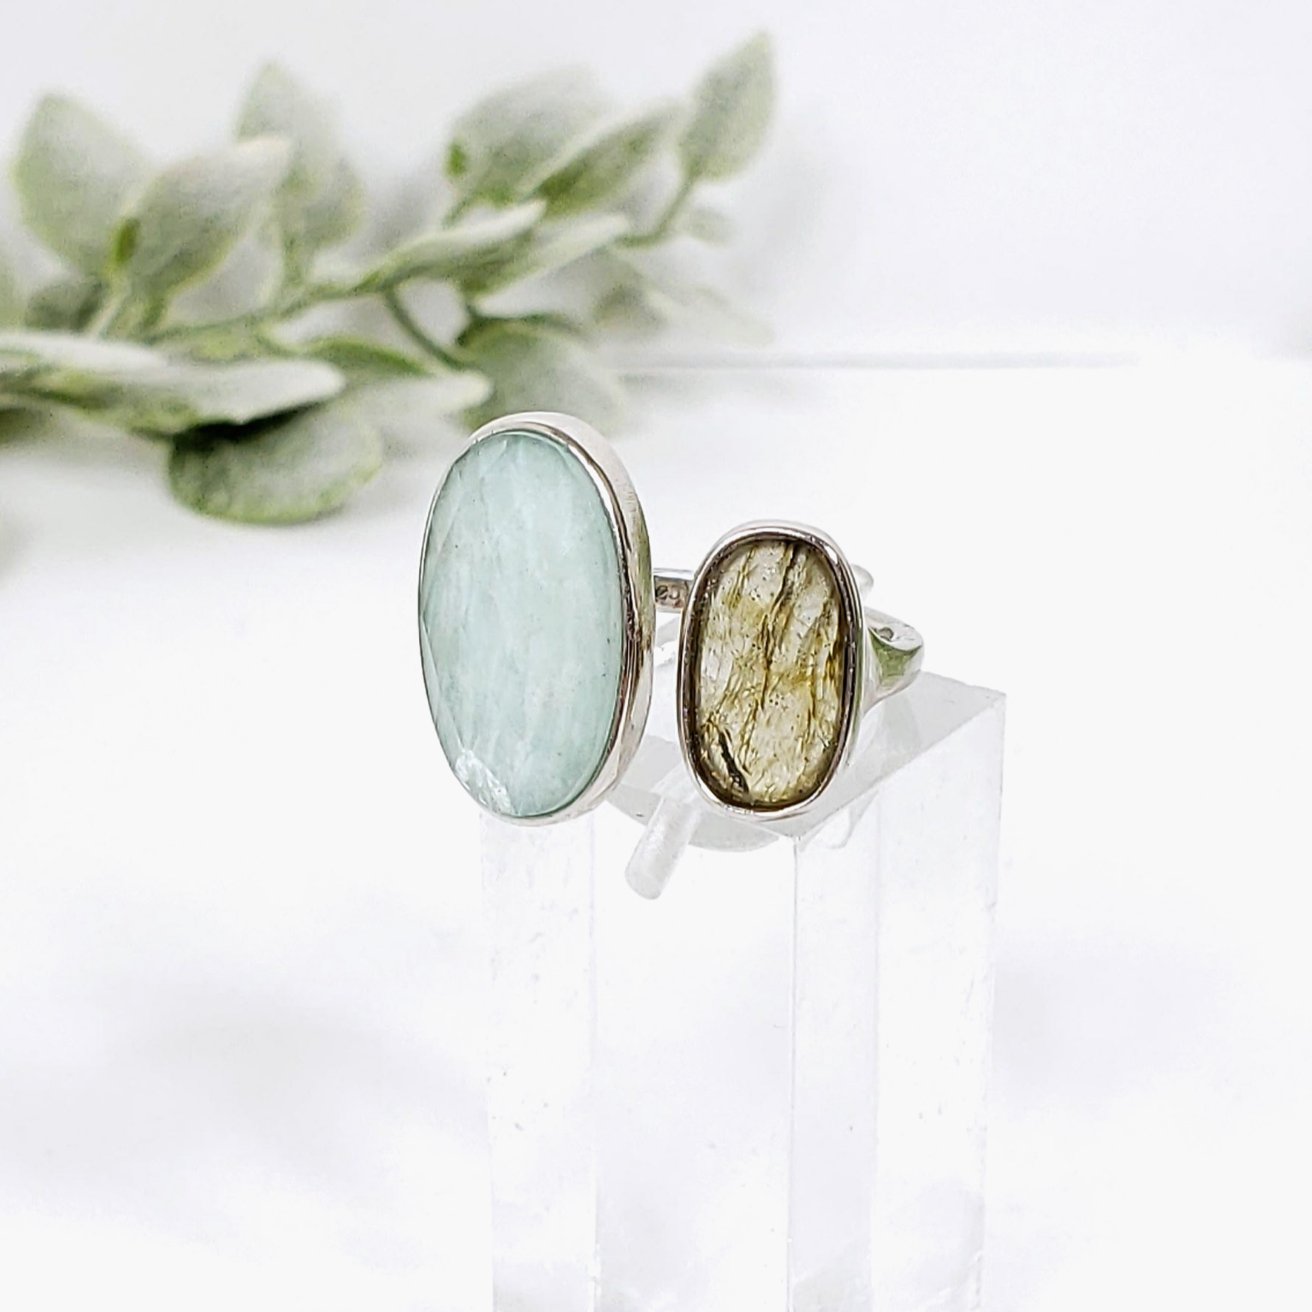 Amazonite Crystal and Labradorite Crystal Adjustable Sterling Silver Ring